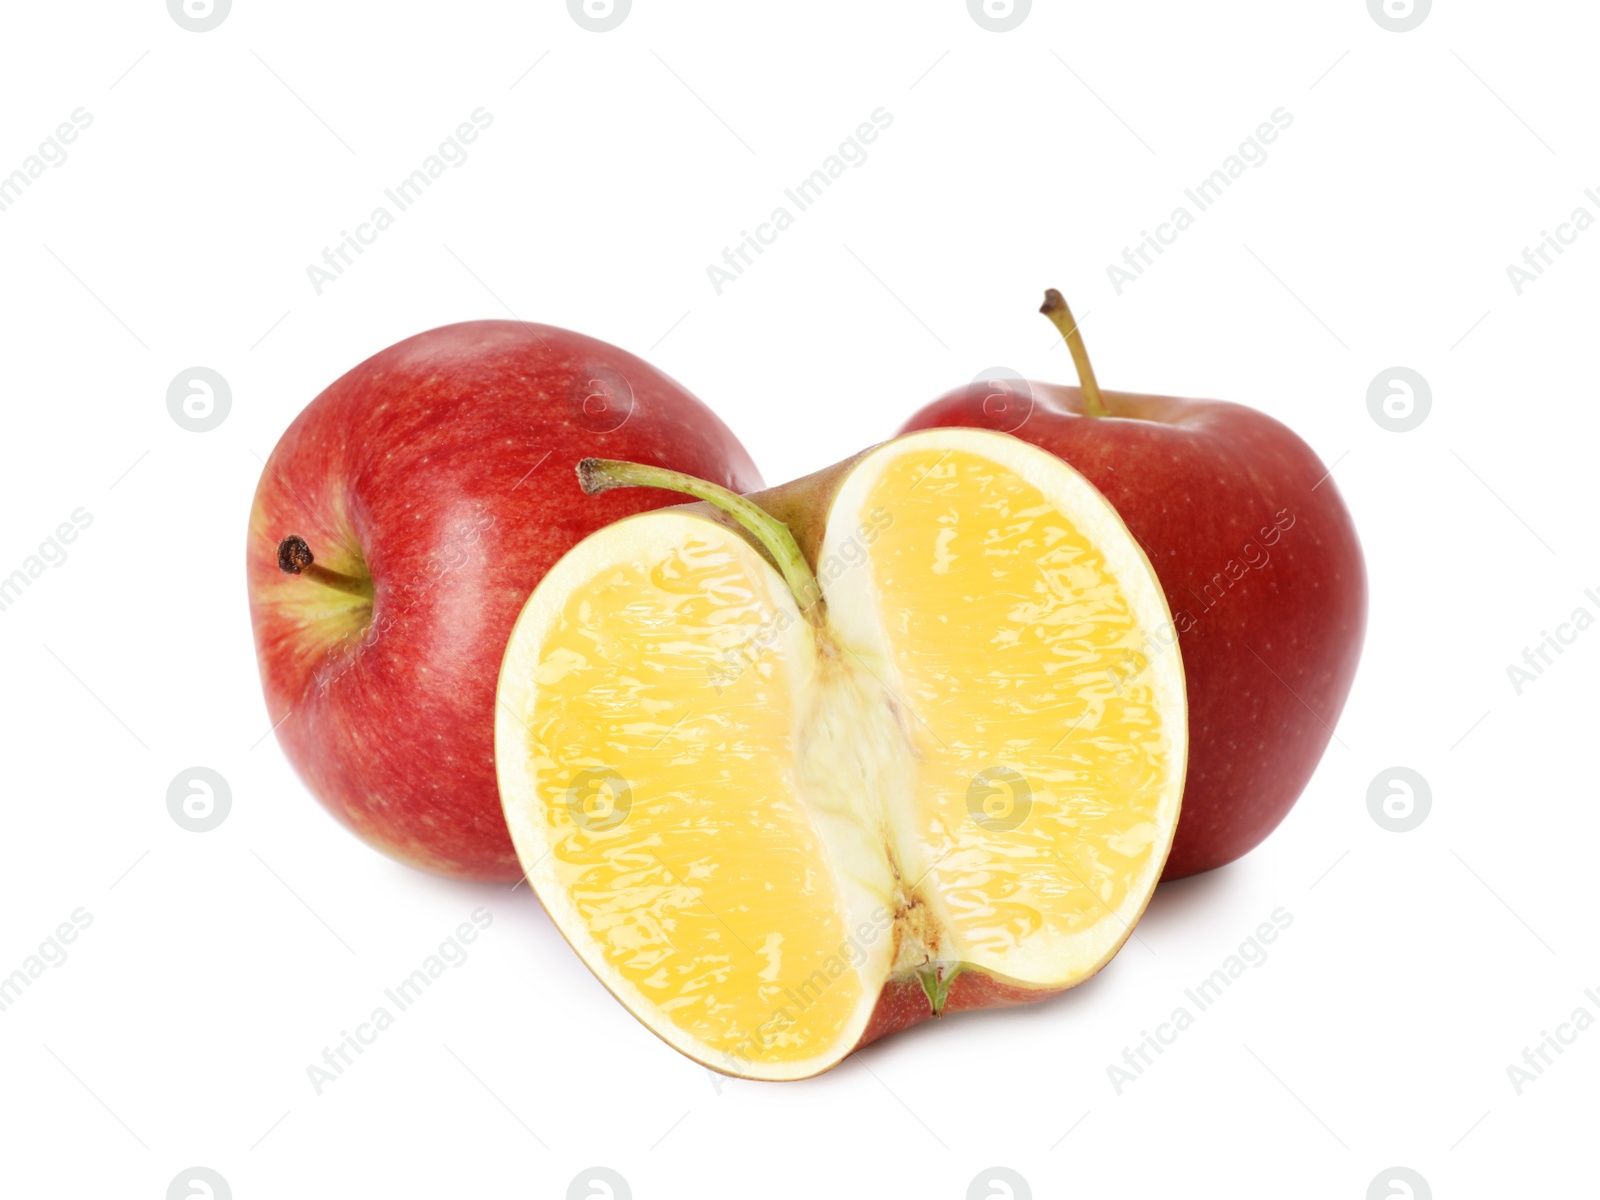 Image of Genetically modified apples with lemon on white background